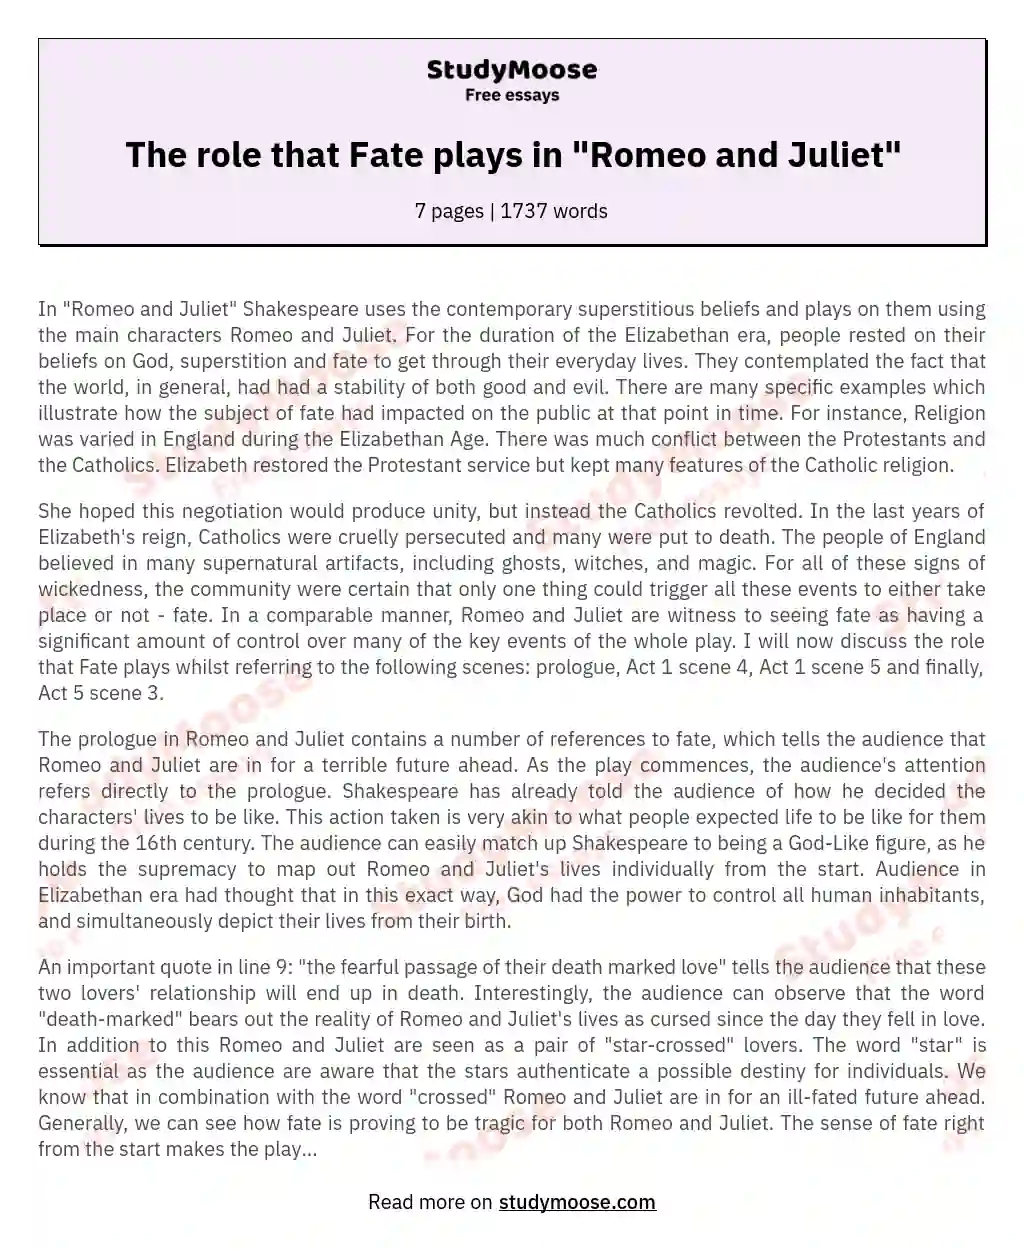 The Role of Fate in Shakespeare's "Romeo and Juliet" essay